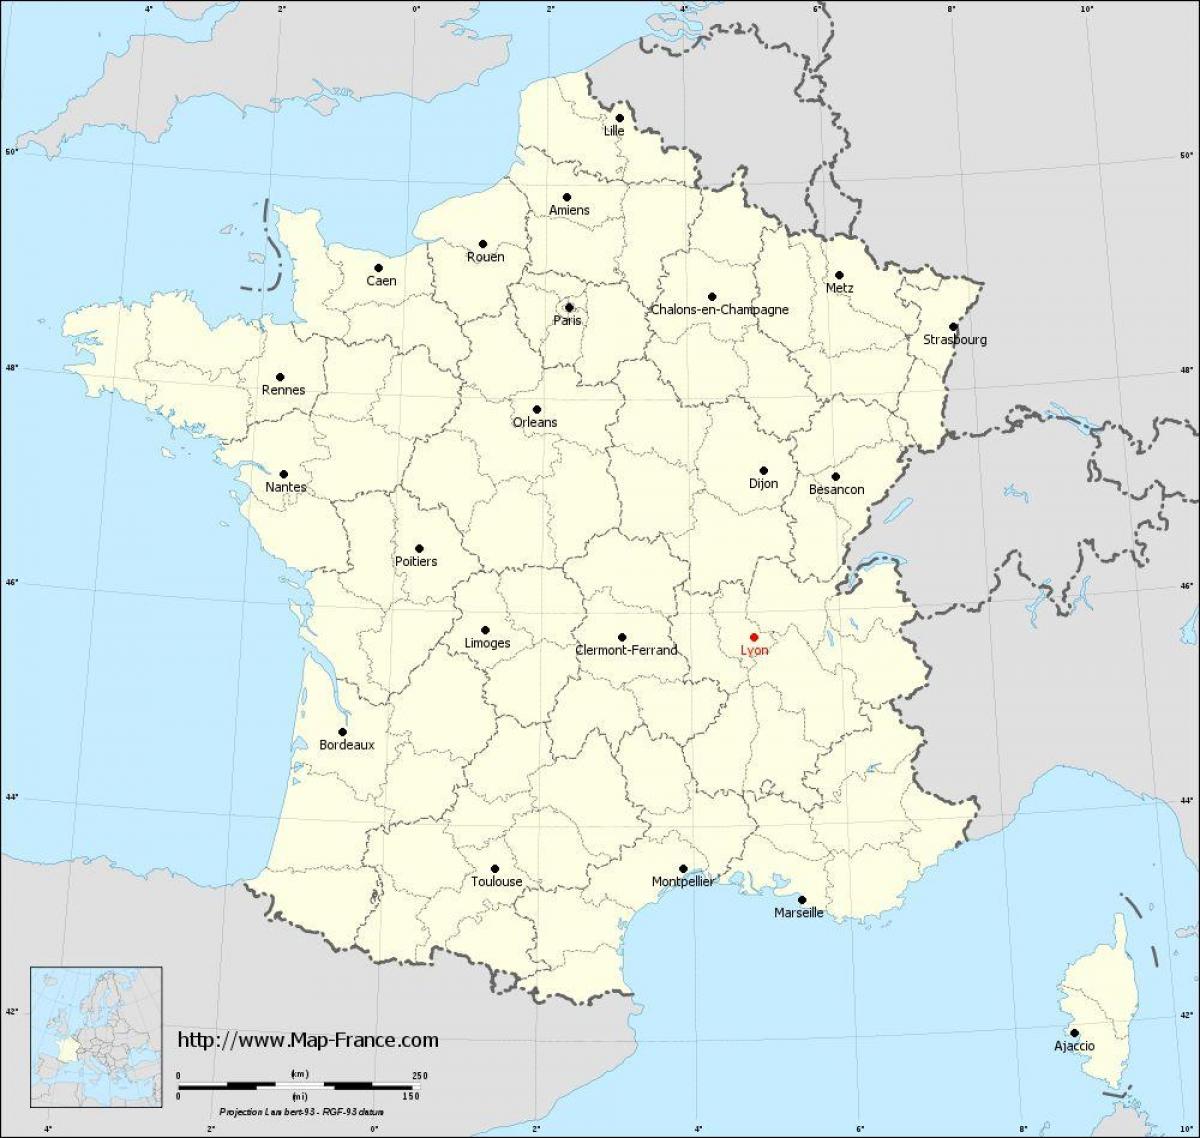 Lyon on the map